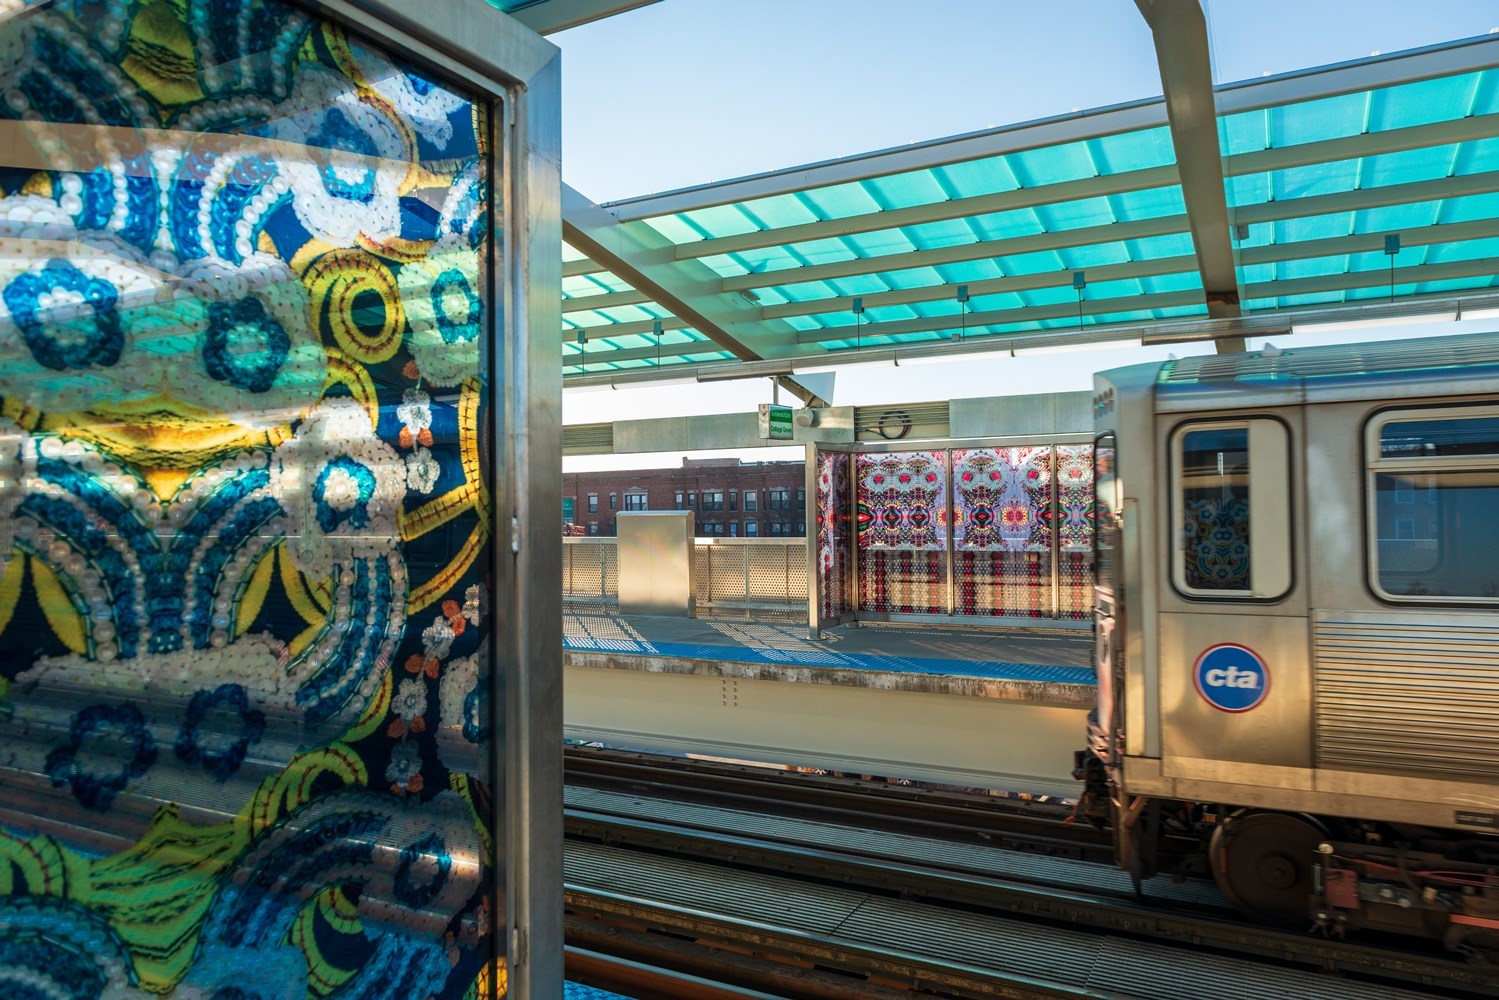 New artistically enhanced windbreaks at Garfield Green Line by Chicago artist Nick Cave